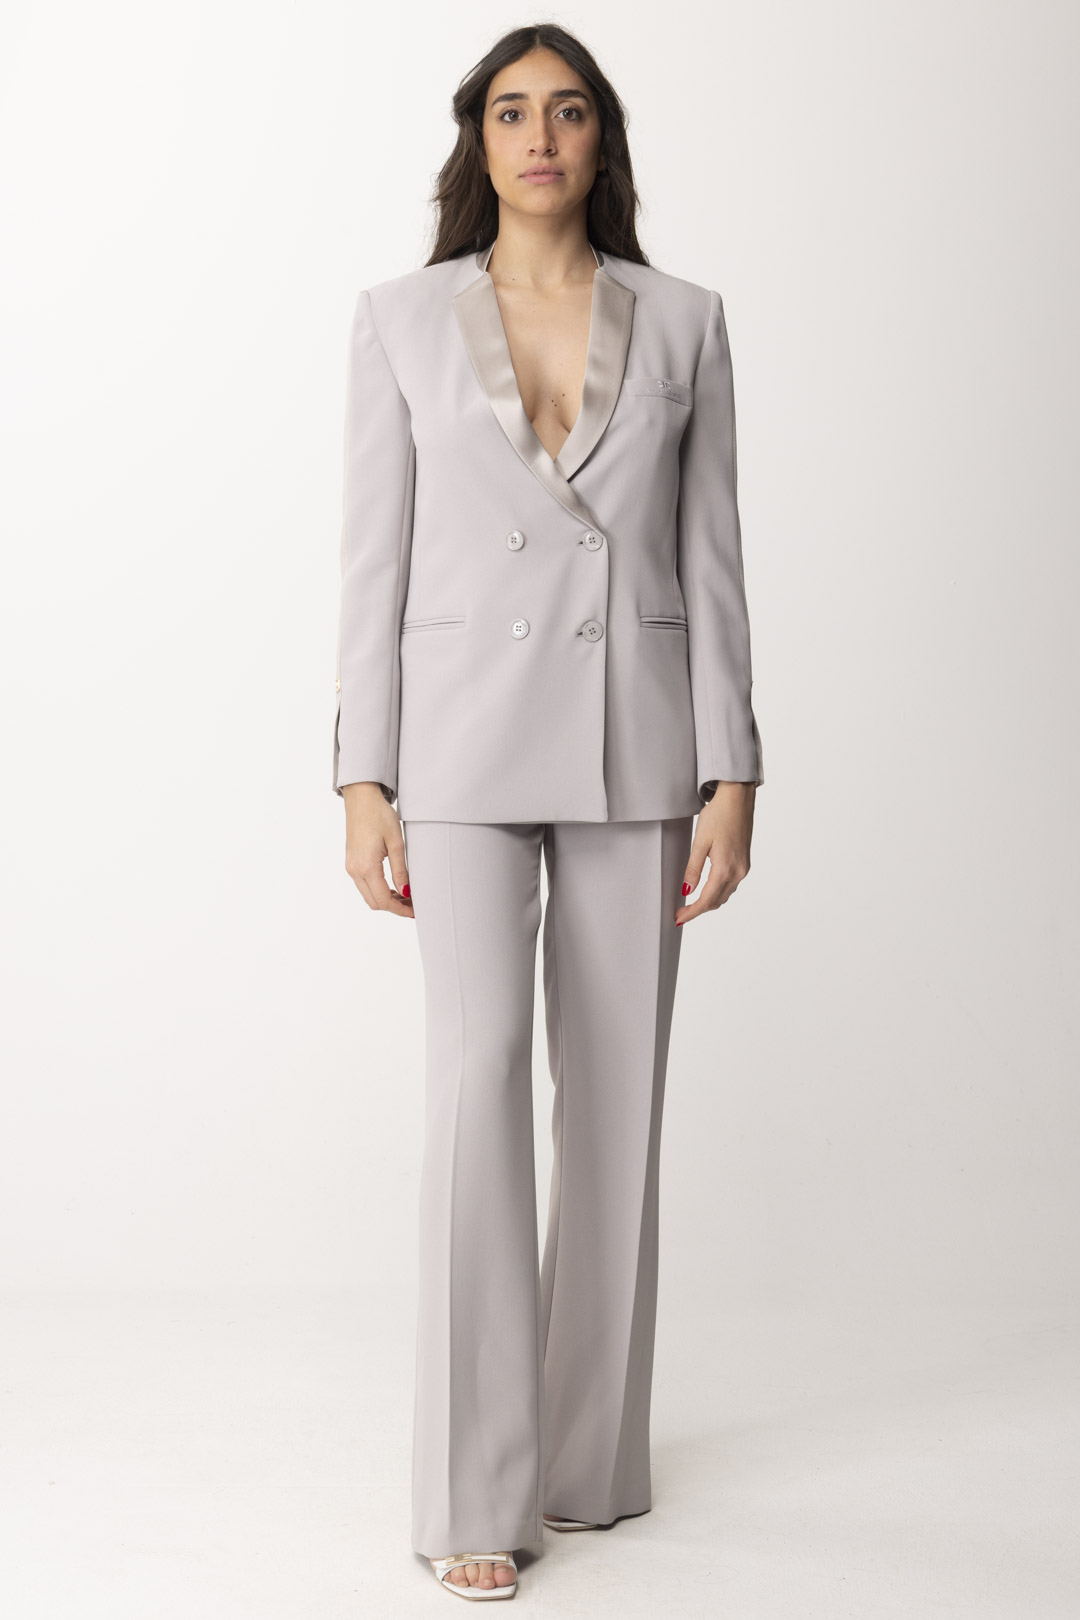 Preview: Elisabetta Franchi Double-Breasted Jacket with Satin Lapels Perla